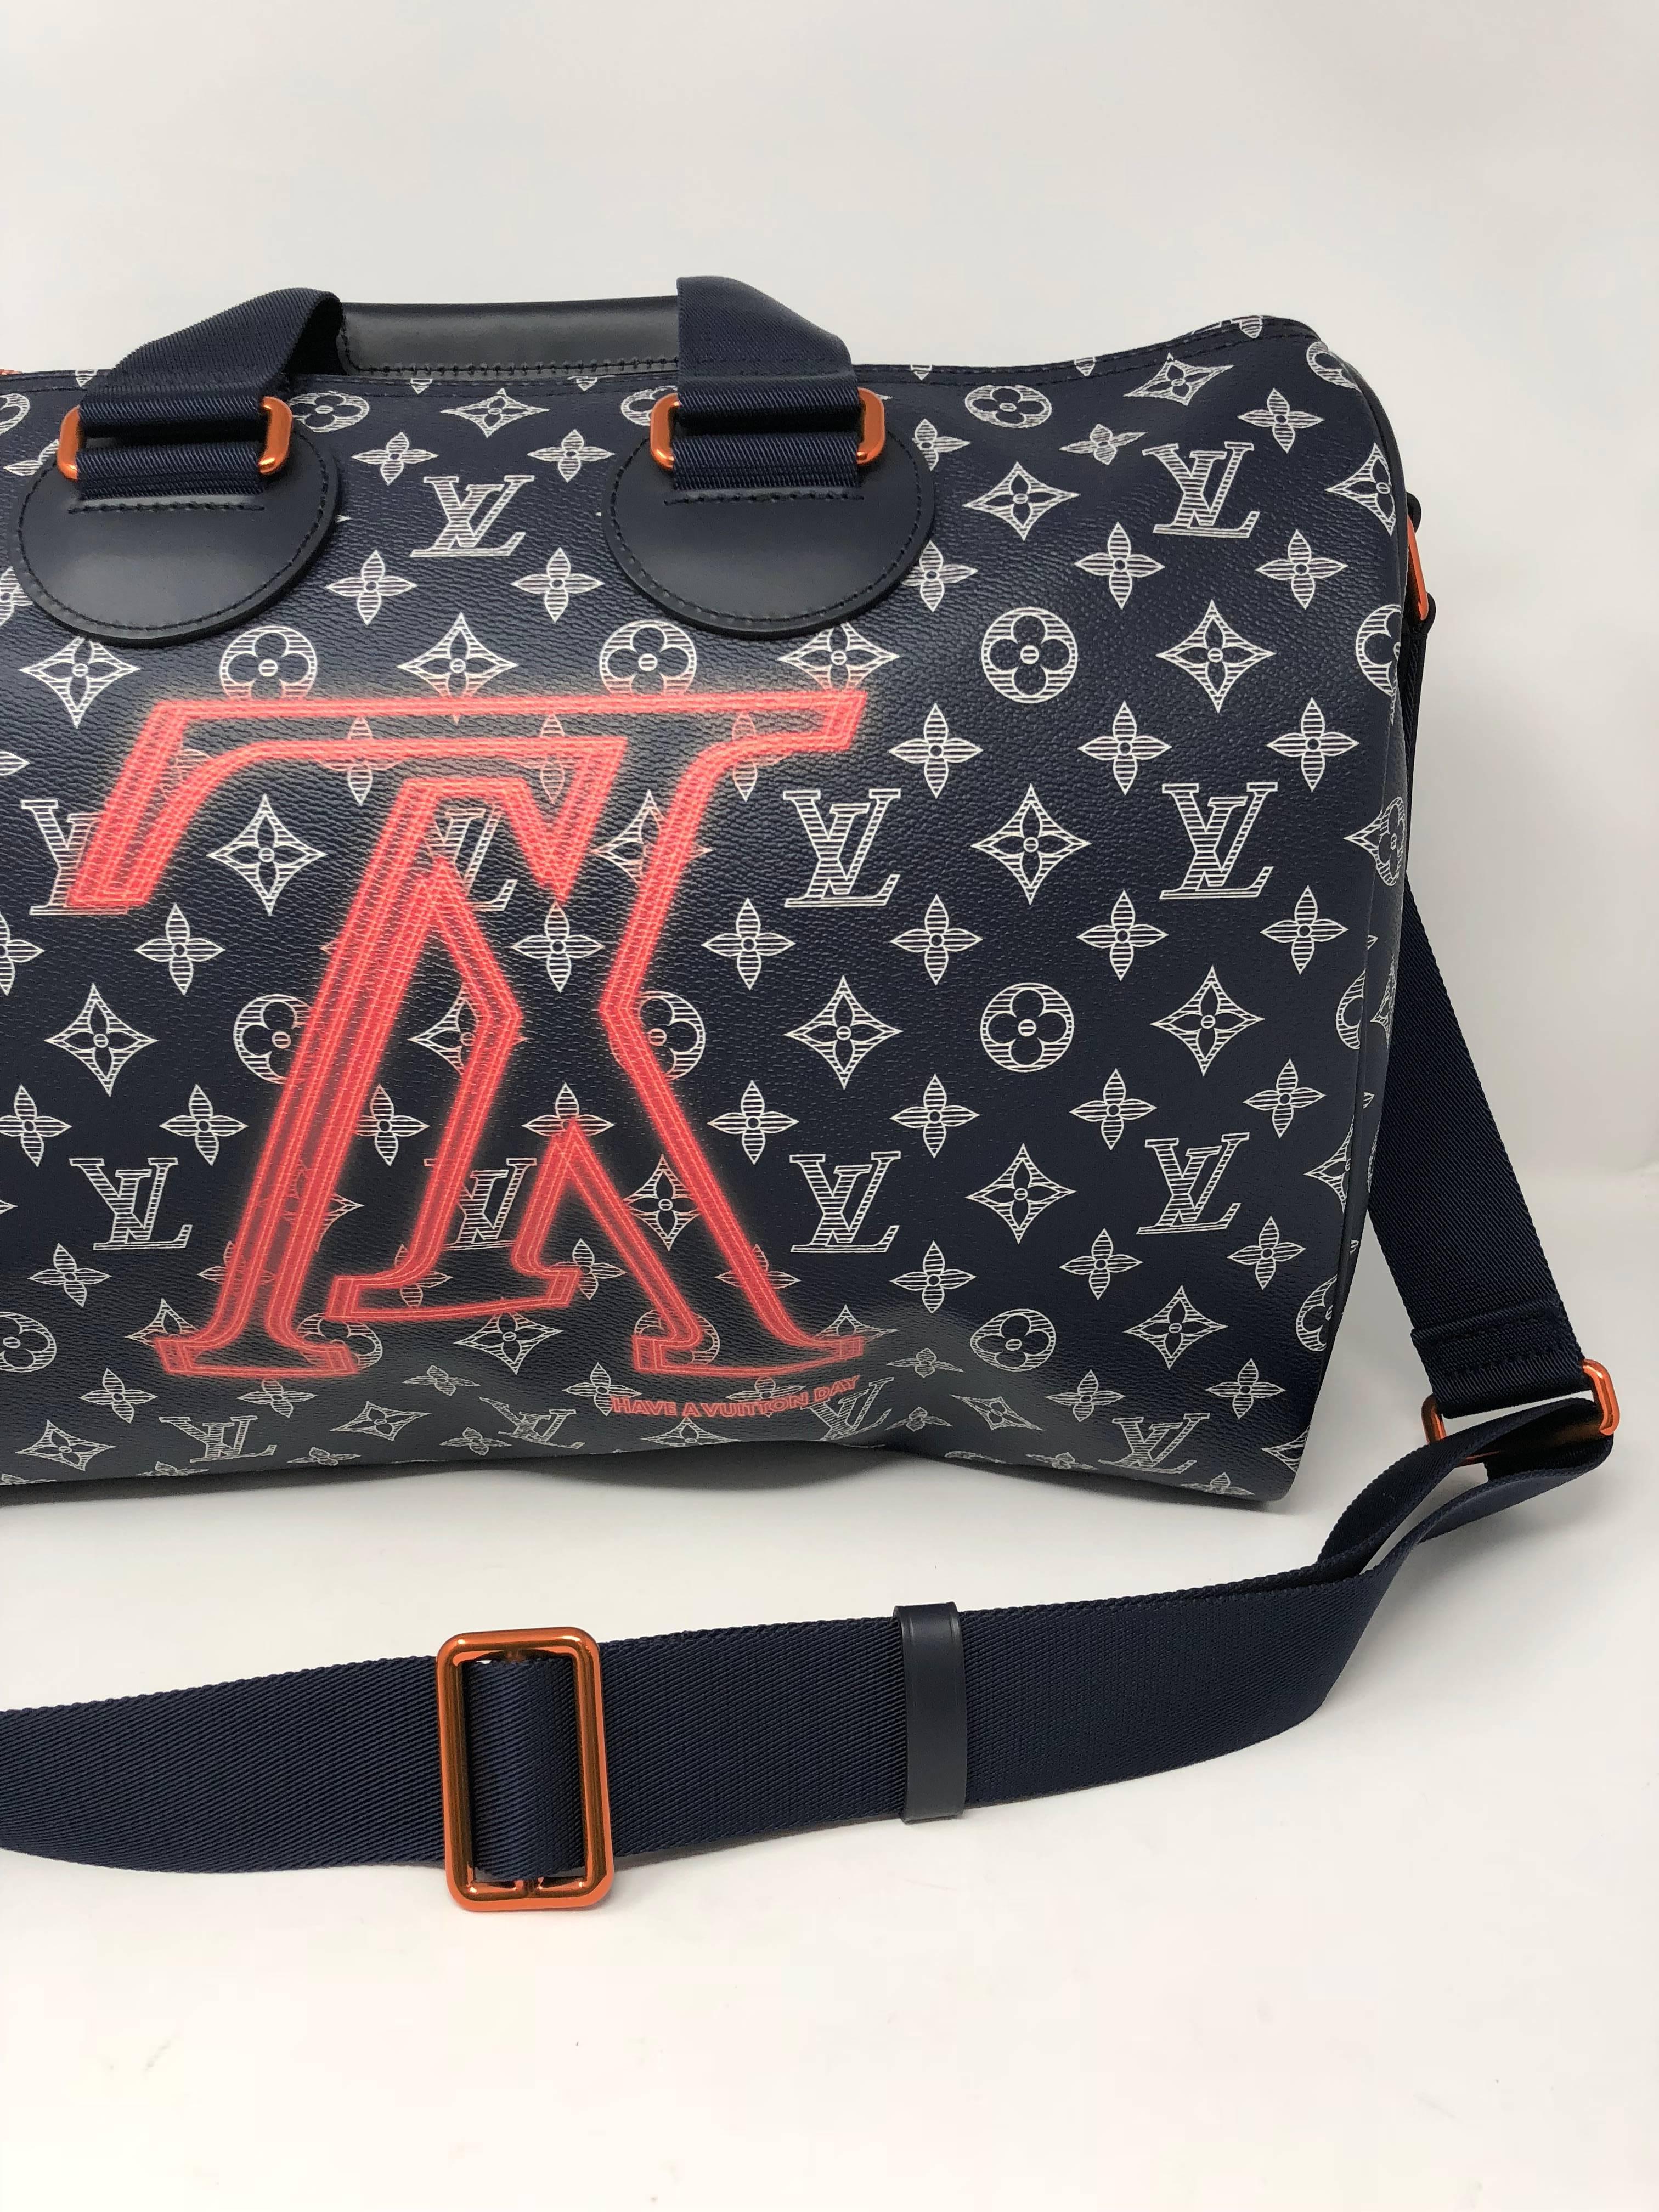 Louis Vuitton Speedy Bandouliere 40 with the Upside Down logo designed by Kim Jones for the Men's Fall 2018 Collection. Made of monogram ink coated canvas and pink metal hardware. Can be worn as a top handle or over the shoulder. Guaranteed